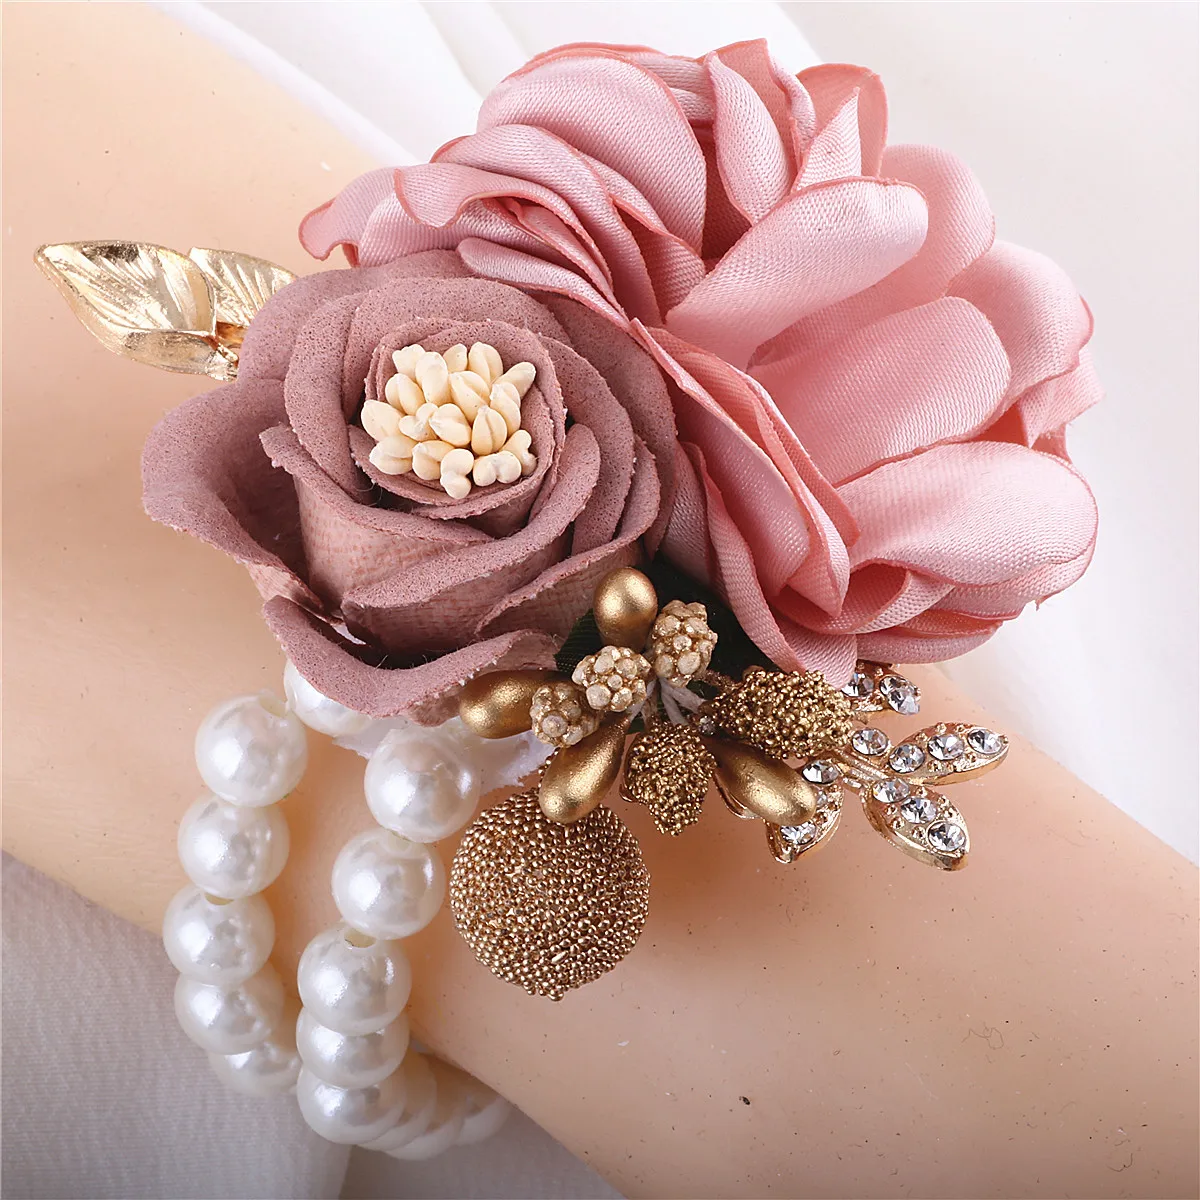 Shuyu 2pcs Wedding Wrist Corsage Rose Flower,Artificial Flower,Bracelet Party Prom for Bride and Bridesmaid(Pink and White)